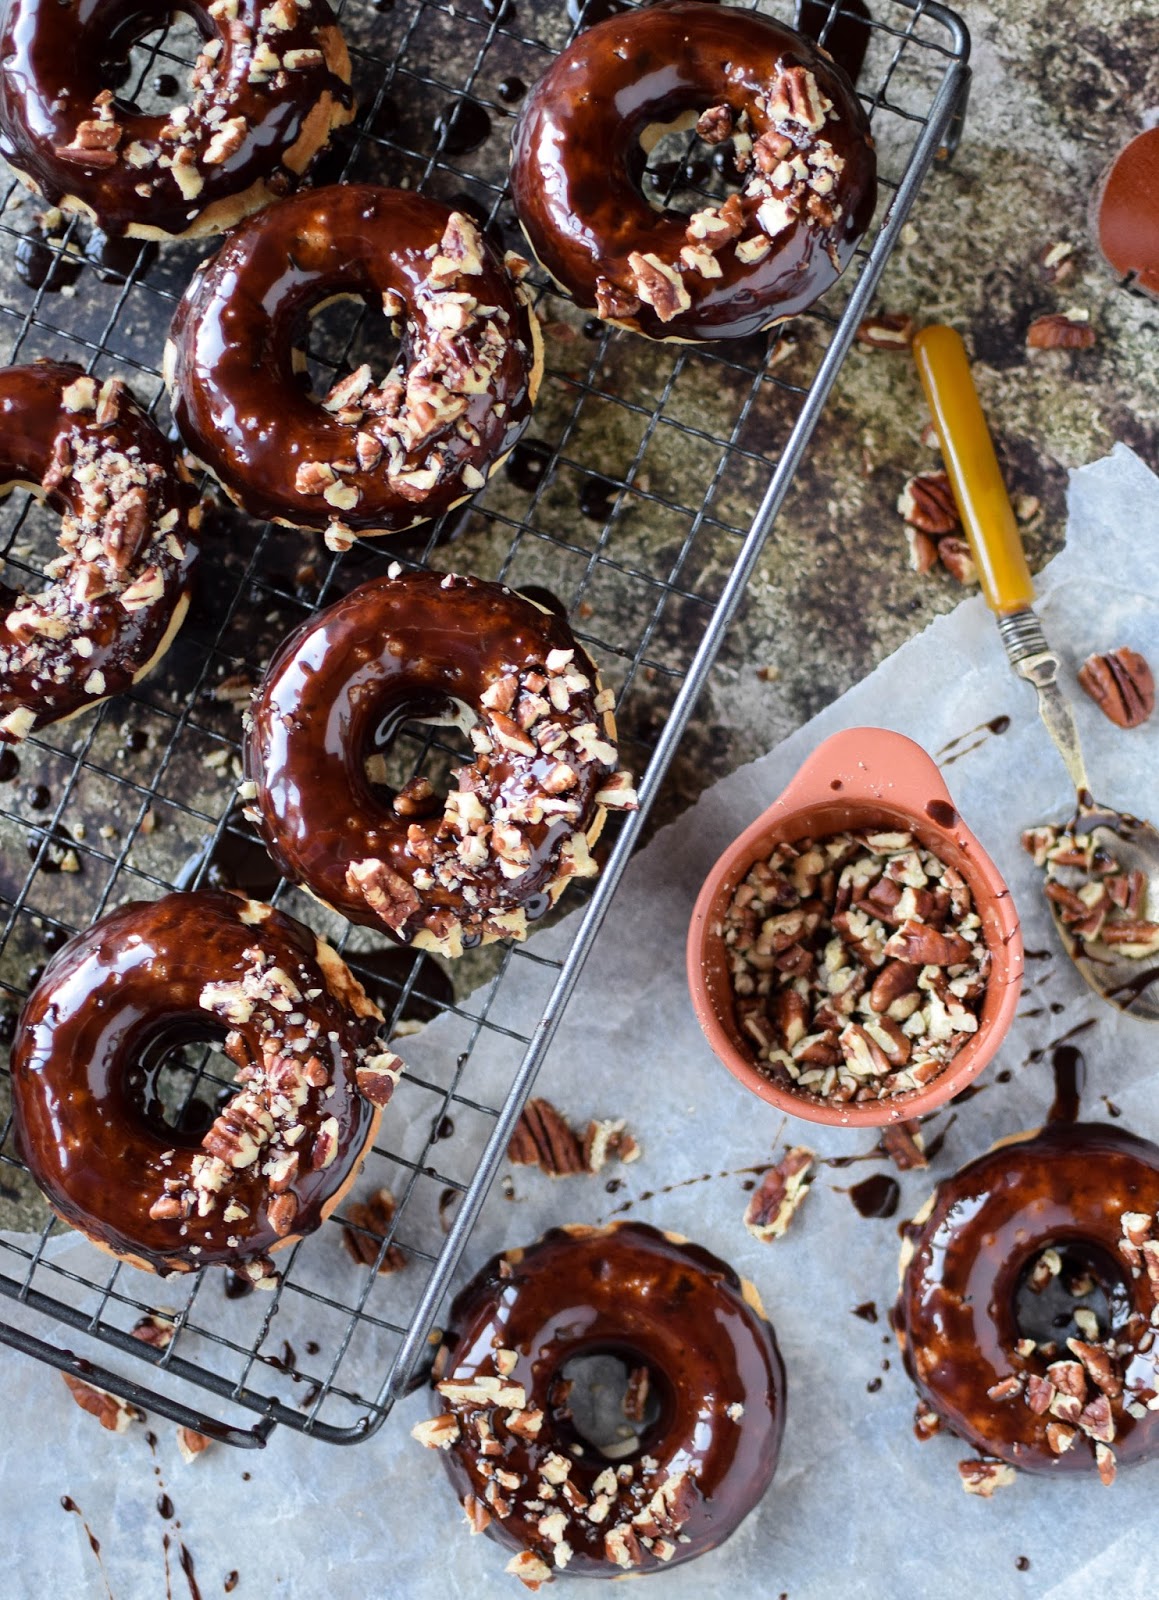 These moist and delicious chocolate chip studded, banana bread doughnuts are dipped in a rich chocolate ganache before being sprinkled with chopped pecans for added crunch. You'll be back for seconds, or even thirds.